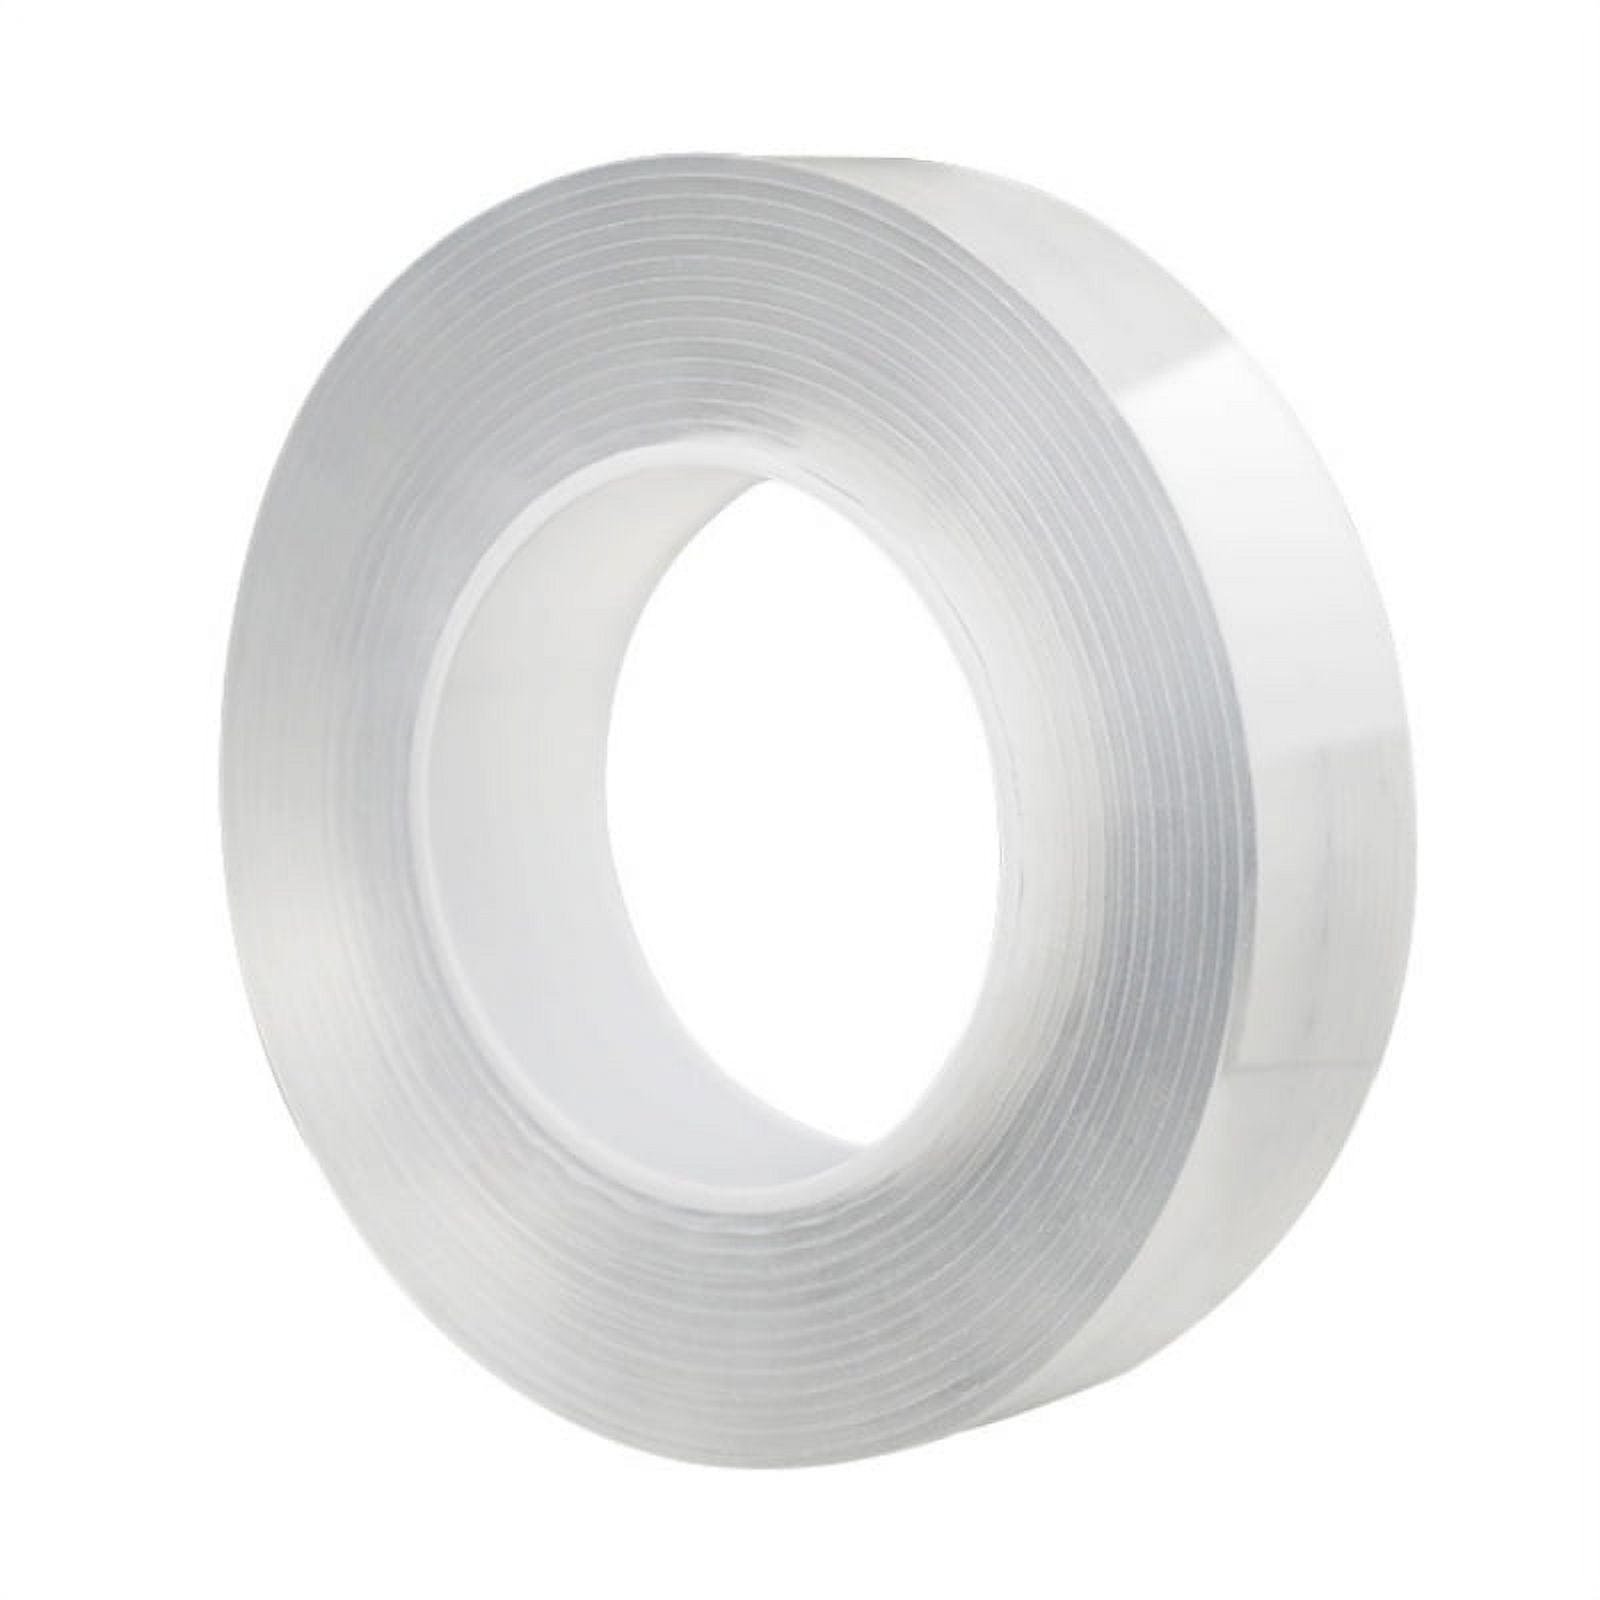 3M CLEAR TAPE - DOUBLE SIDED